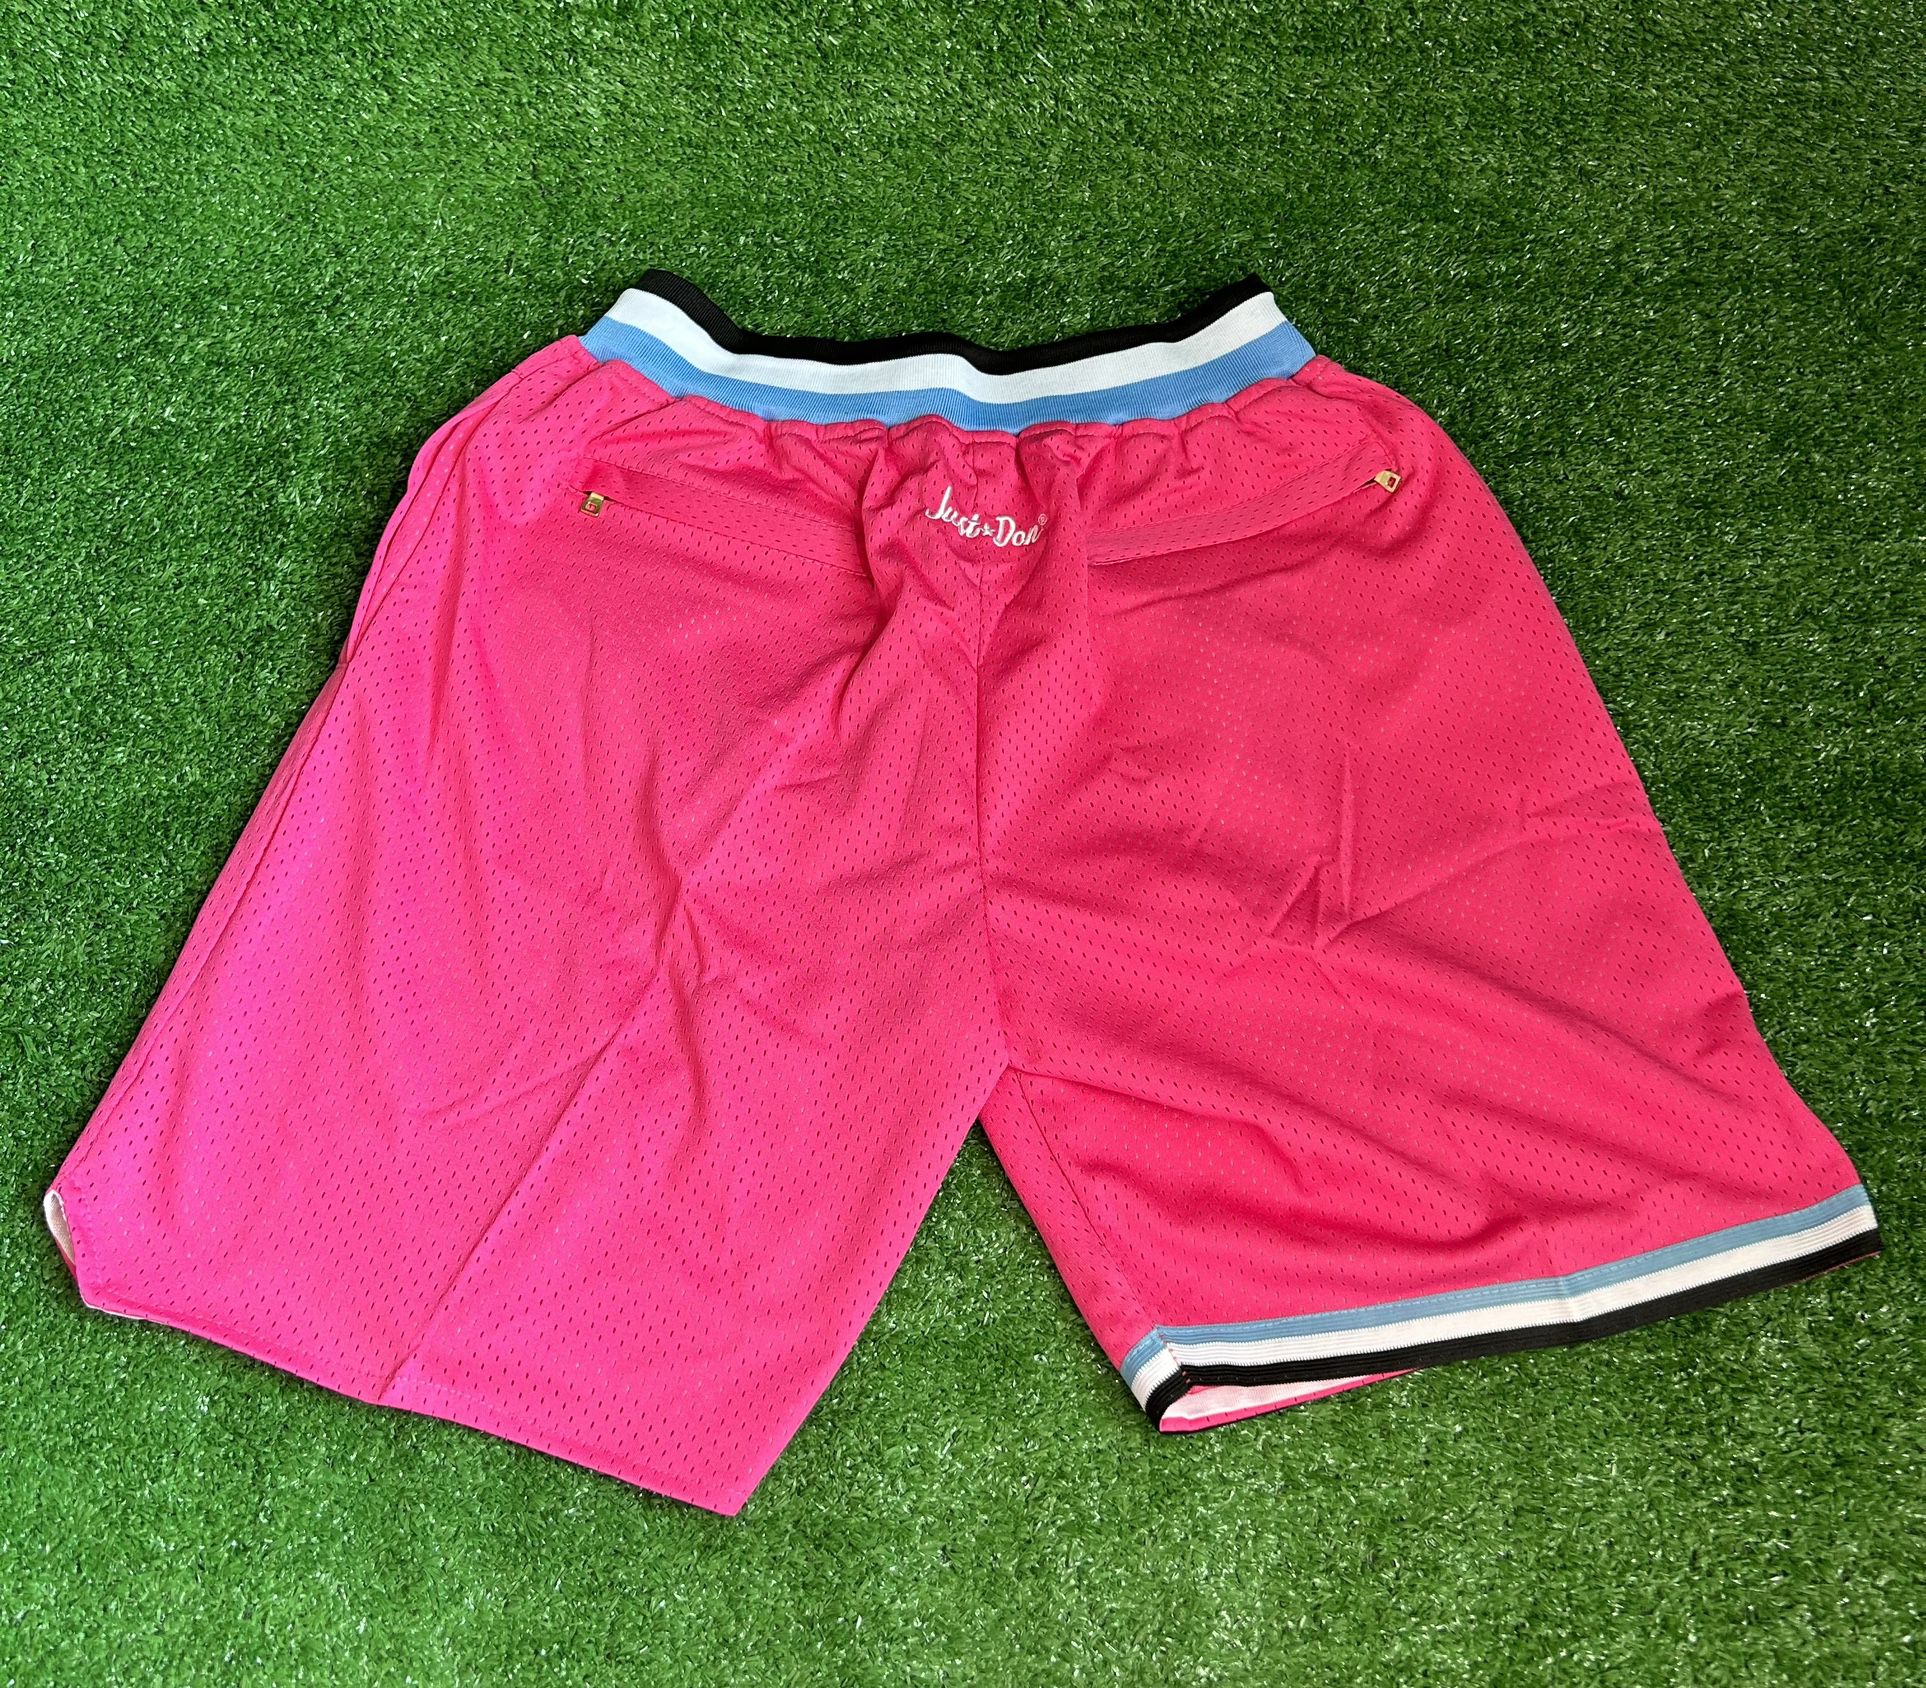 NBA JUST DON SHORTS MIAMI HEAT PINK SIZE S,M,L for Sale in Fort Lauderdale,  FL - OfferUp